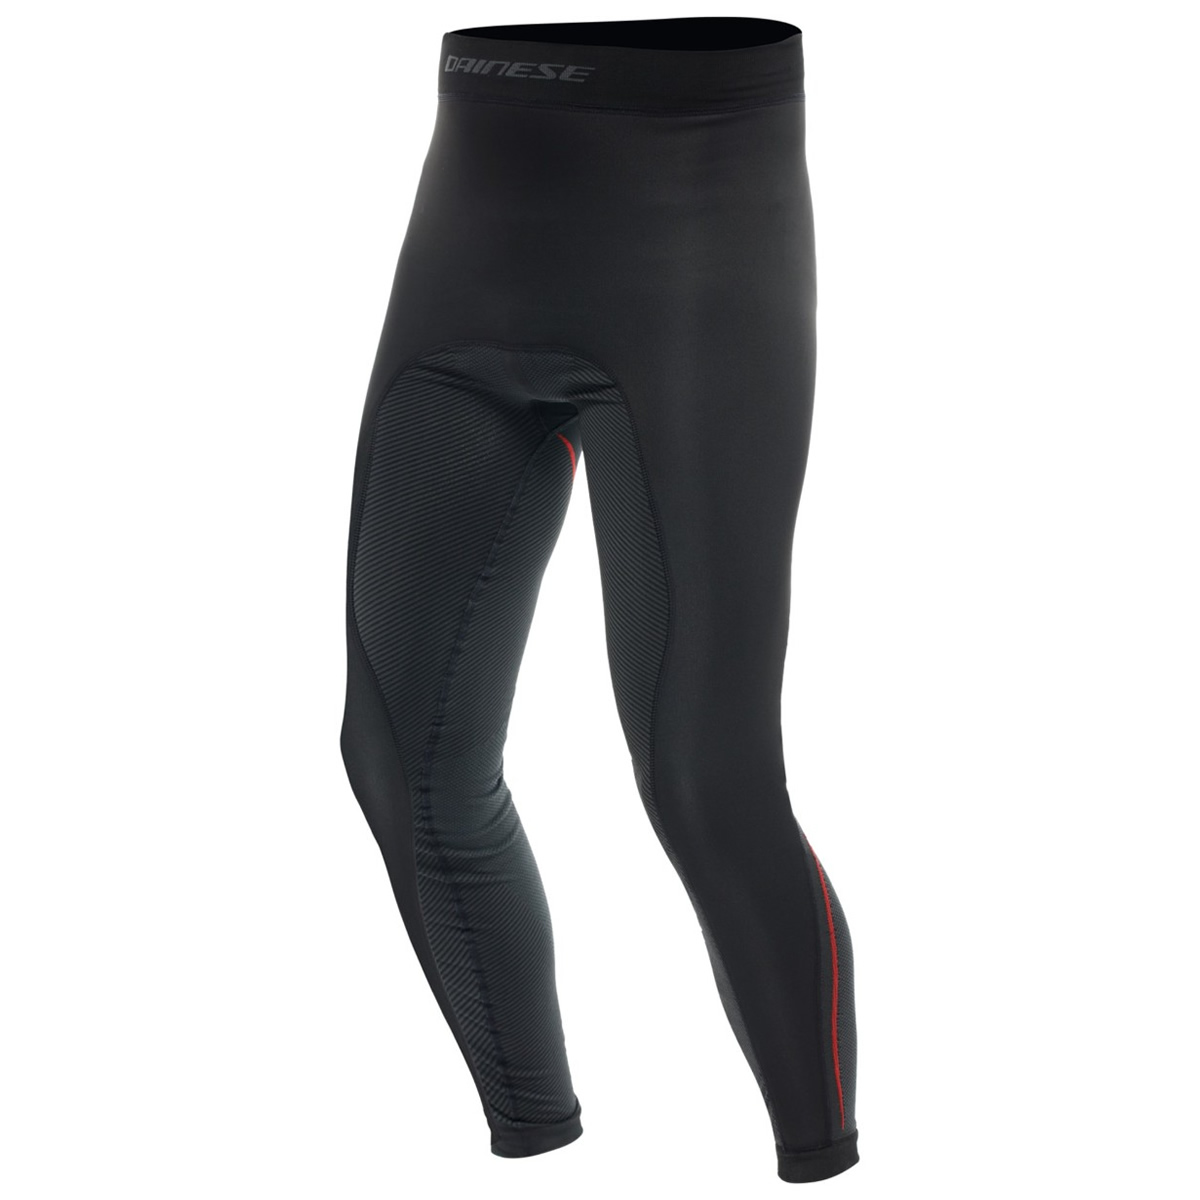 Dainese Funktionshose No Wind Thermo Pants, schwarz-rot